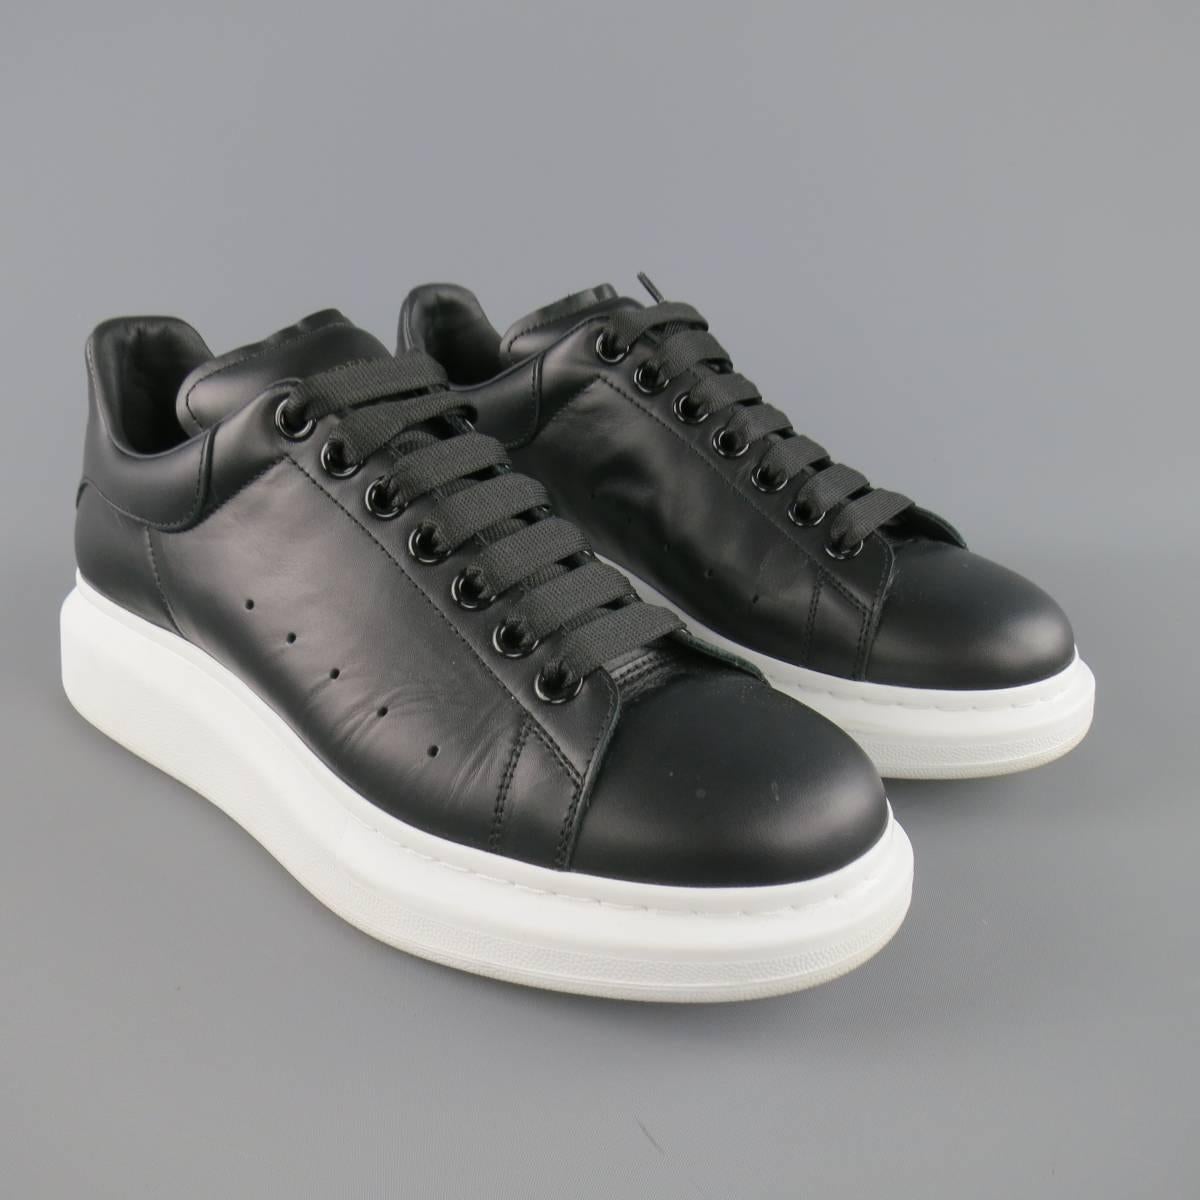 ALEXANDER MCQUEEN lace up sneakers come in a smooth matte black leather and feature oversized black grommets, a round toe, and oversized chunky white platform sole. With box. Made in Italy.
 
Excellent Pre-Owned Condition.
Marked: 42
 
Outsole: 12 x